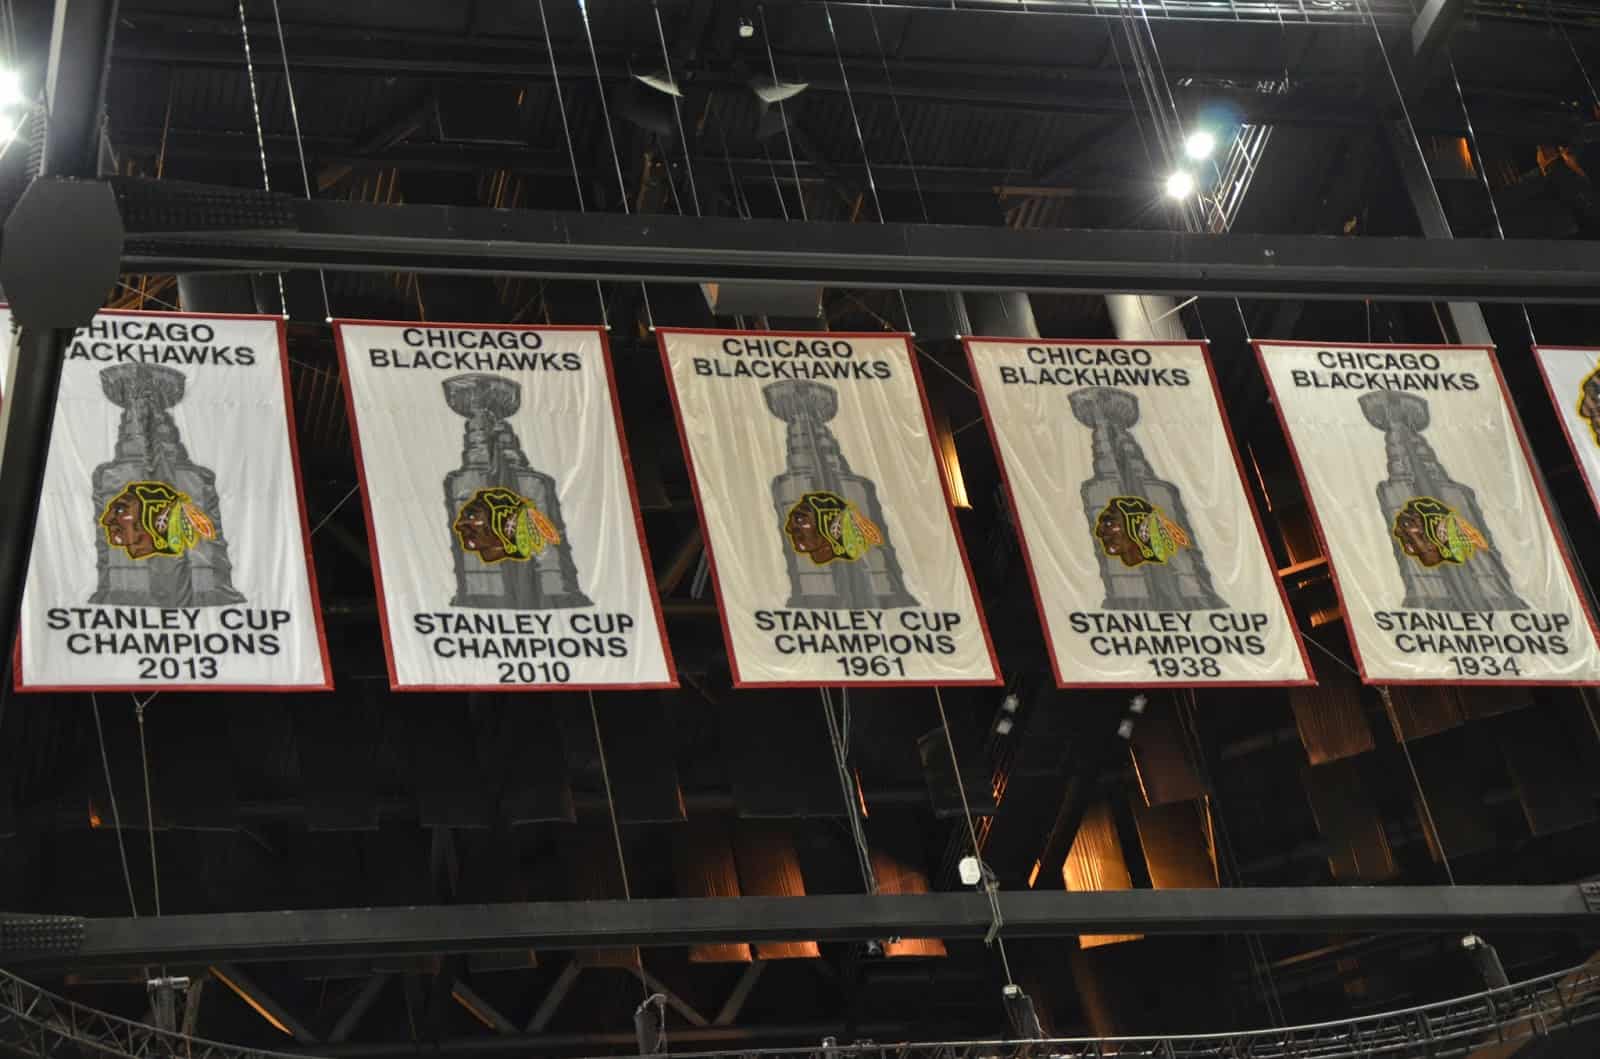 Stanley Cup championship banners at the United Center, Chicago, Illinois